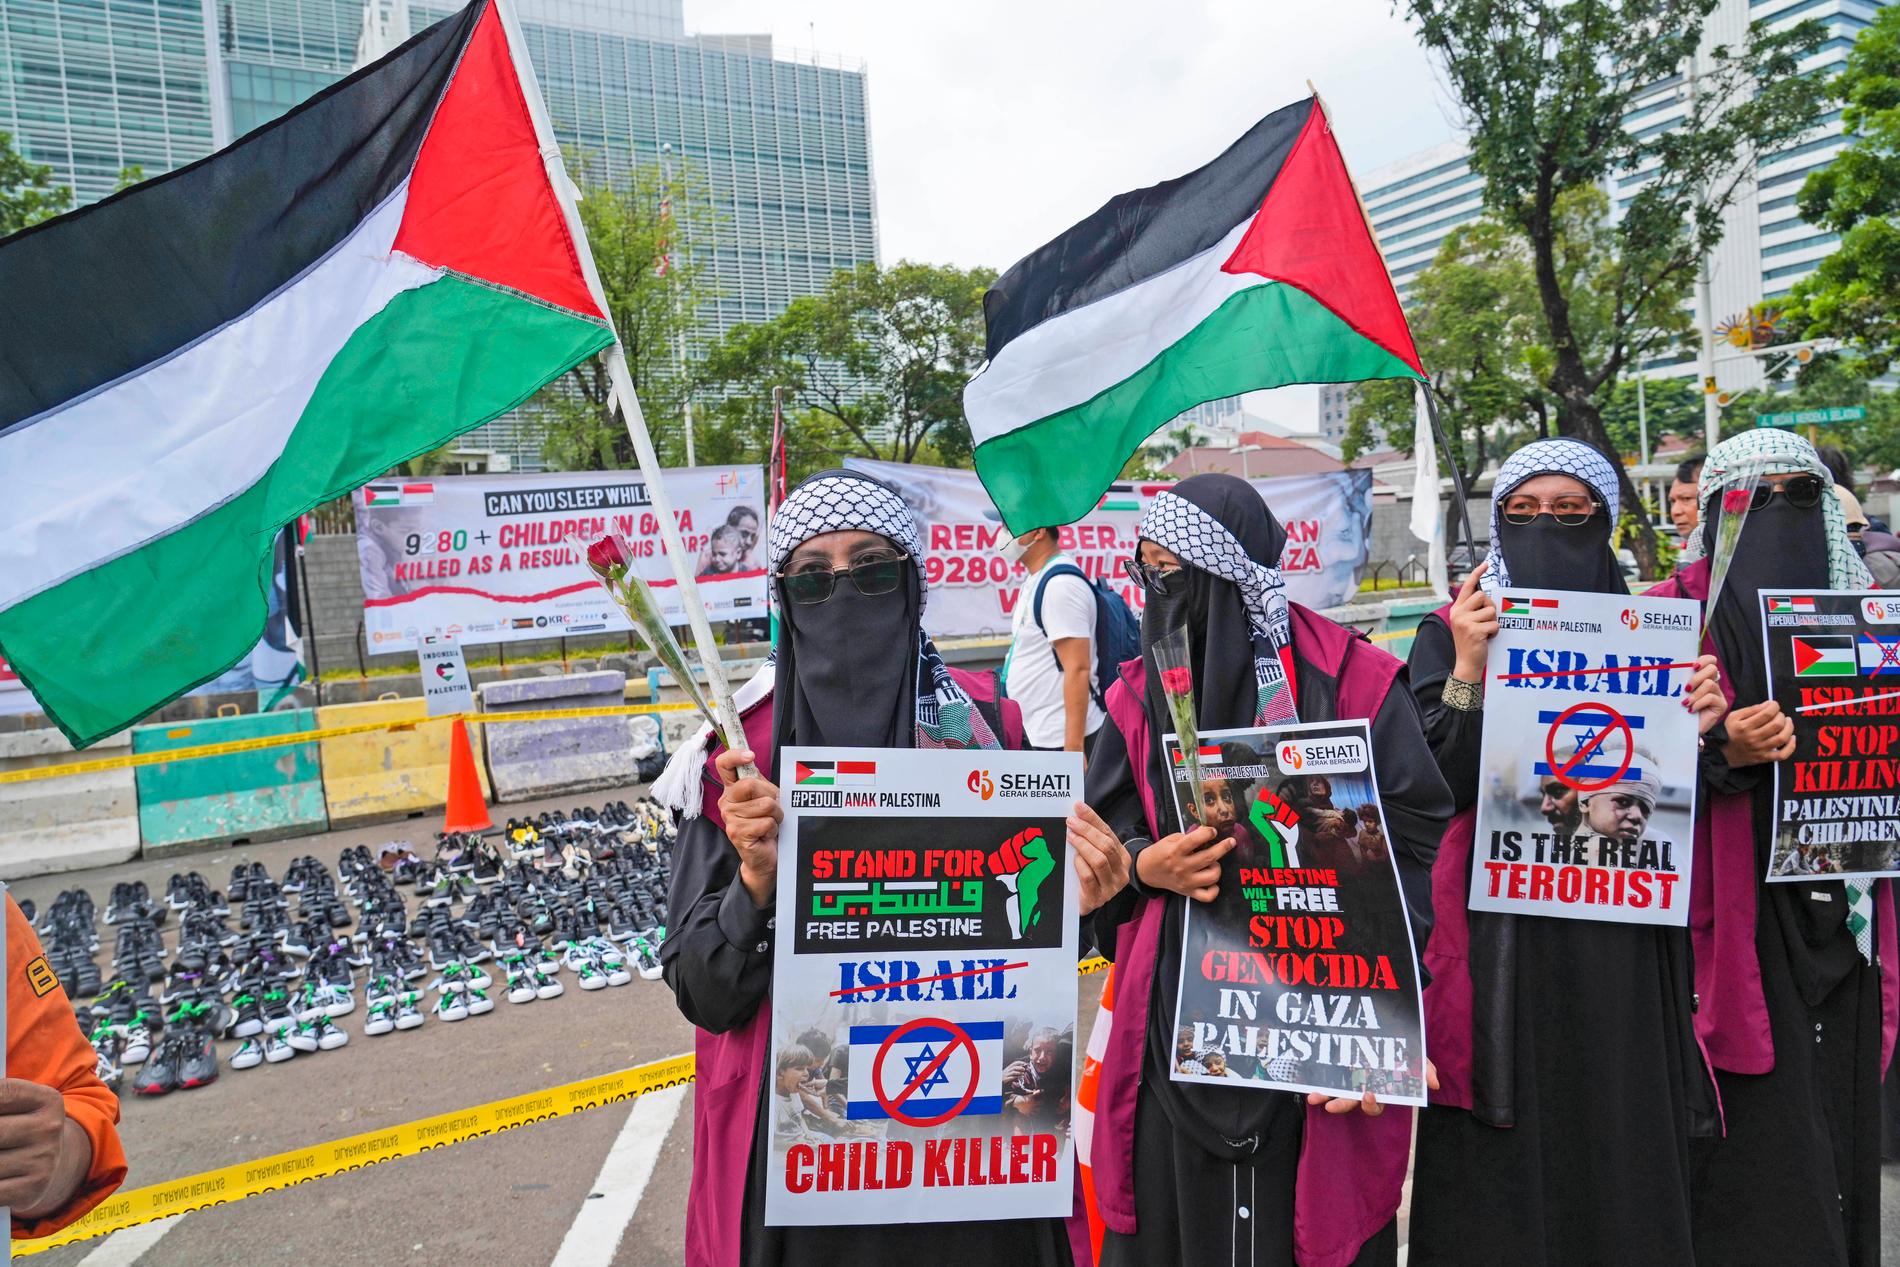     The photo is from a protest demonstration in the Indonesian capital, Jakarta. 